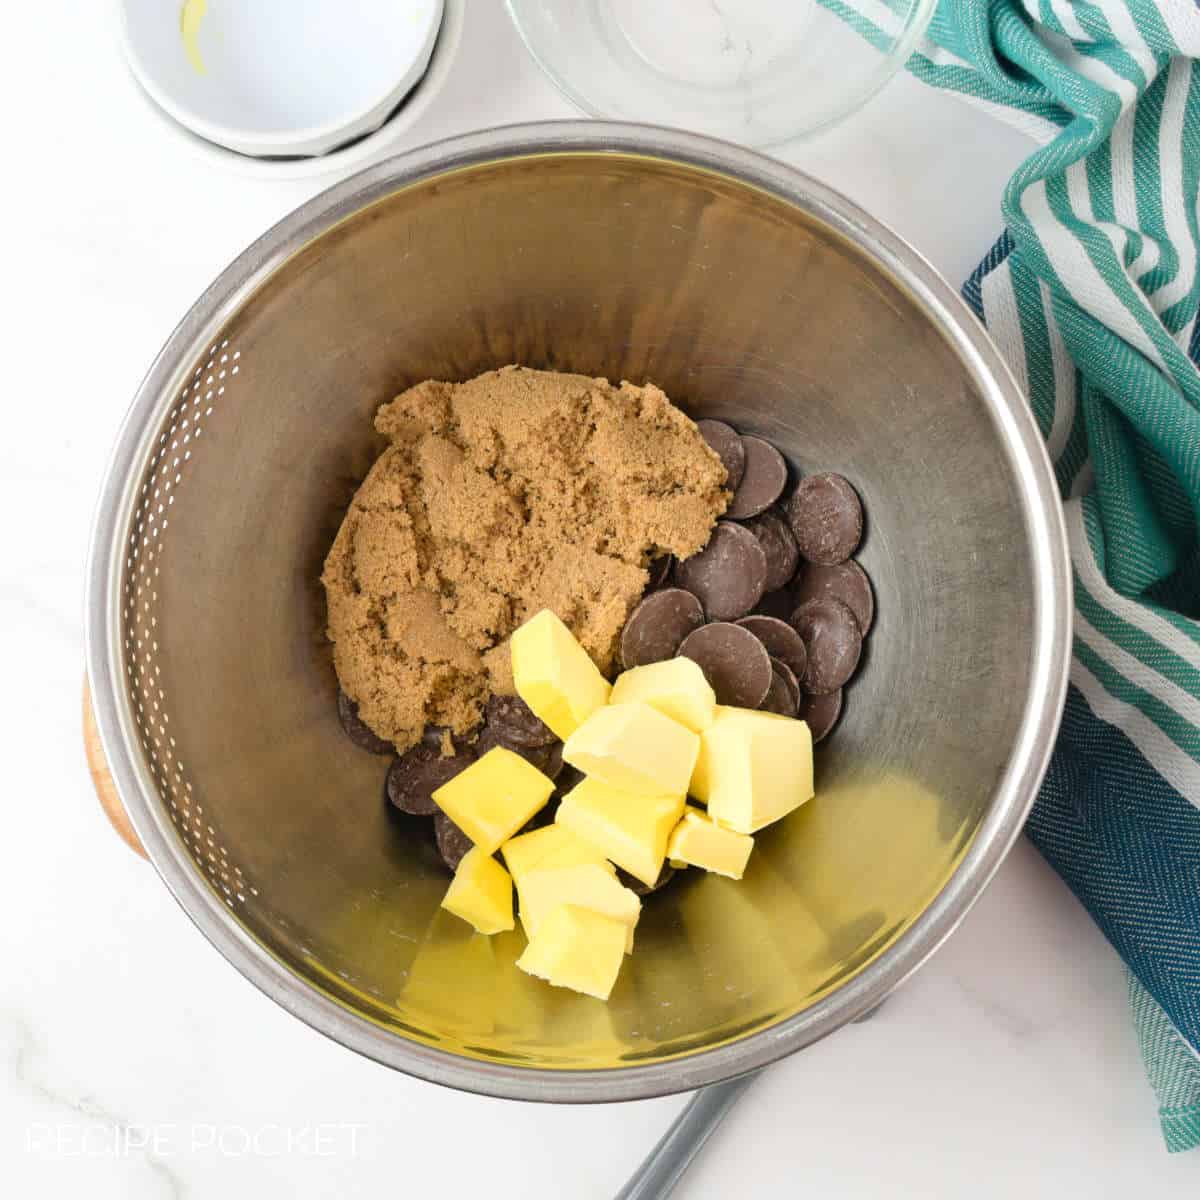 Brown sugar, butter and chocolate in a metal bowl.